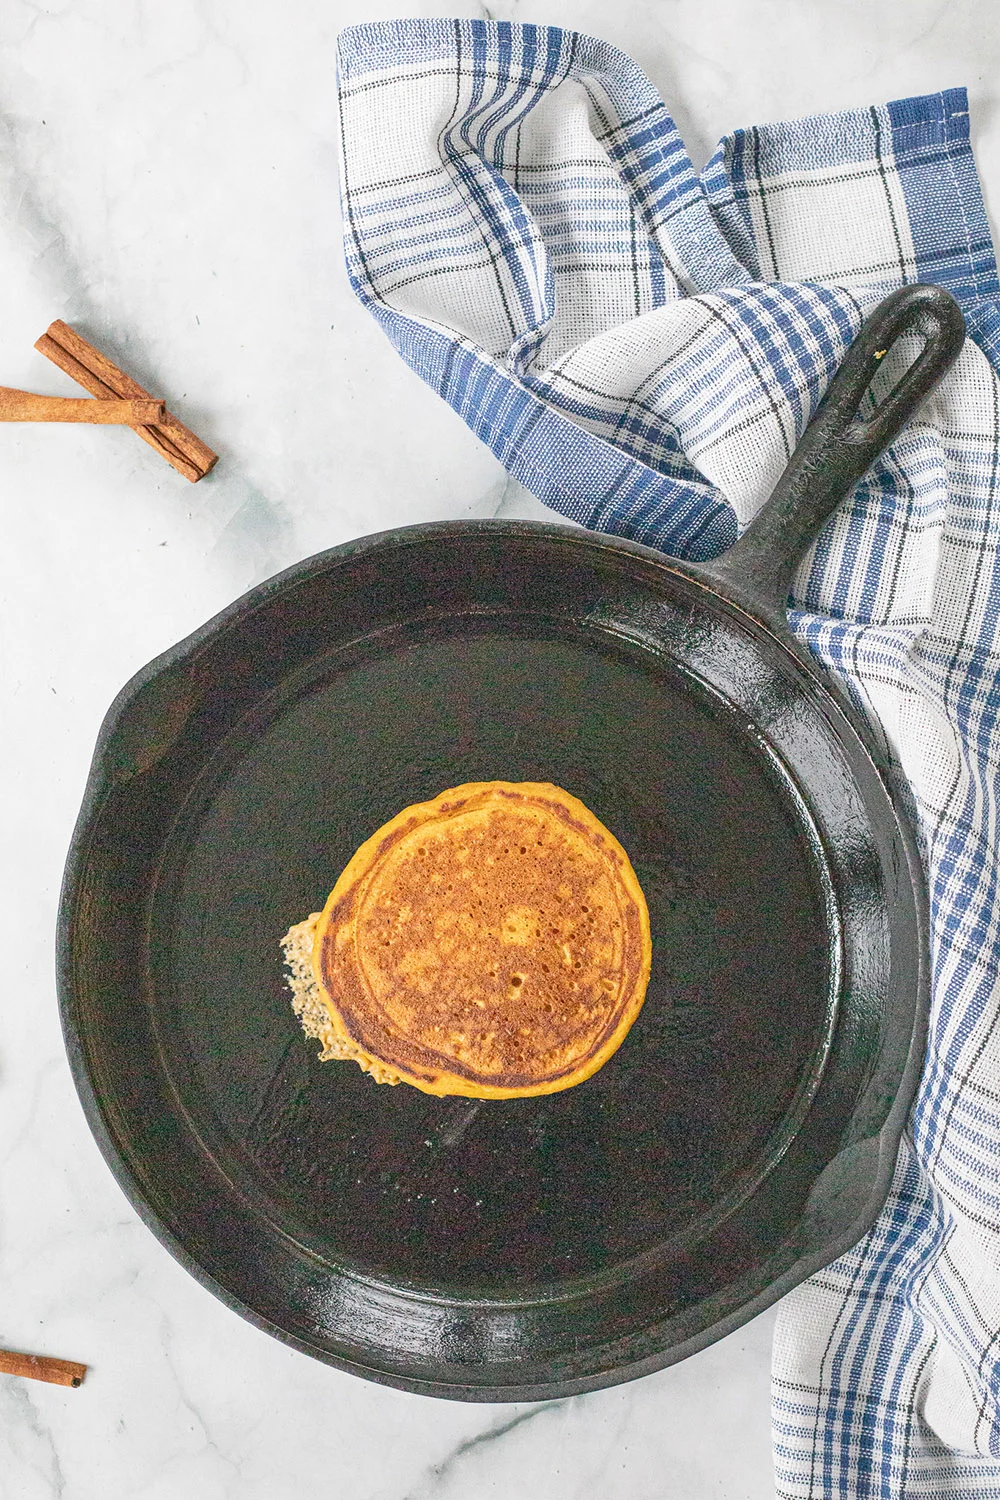 A pancake in a skillet.